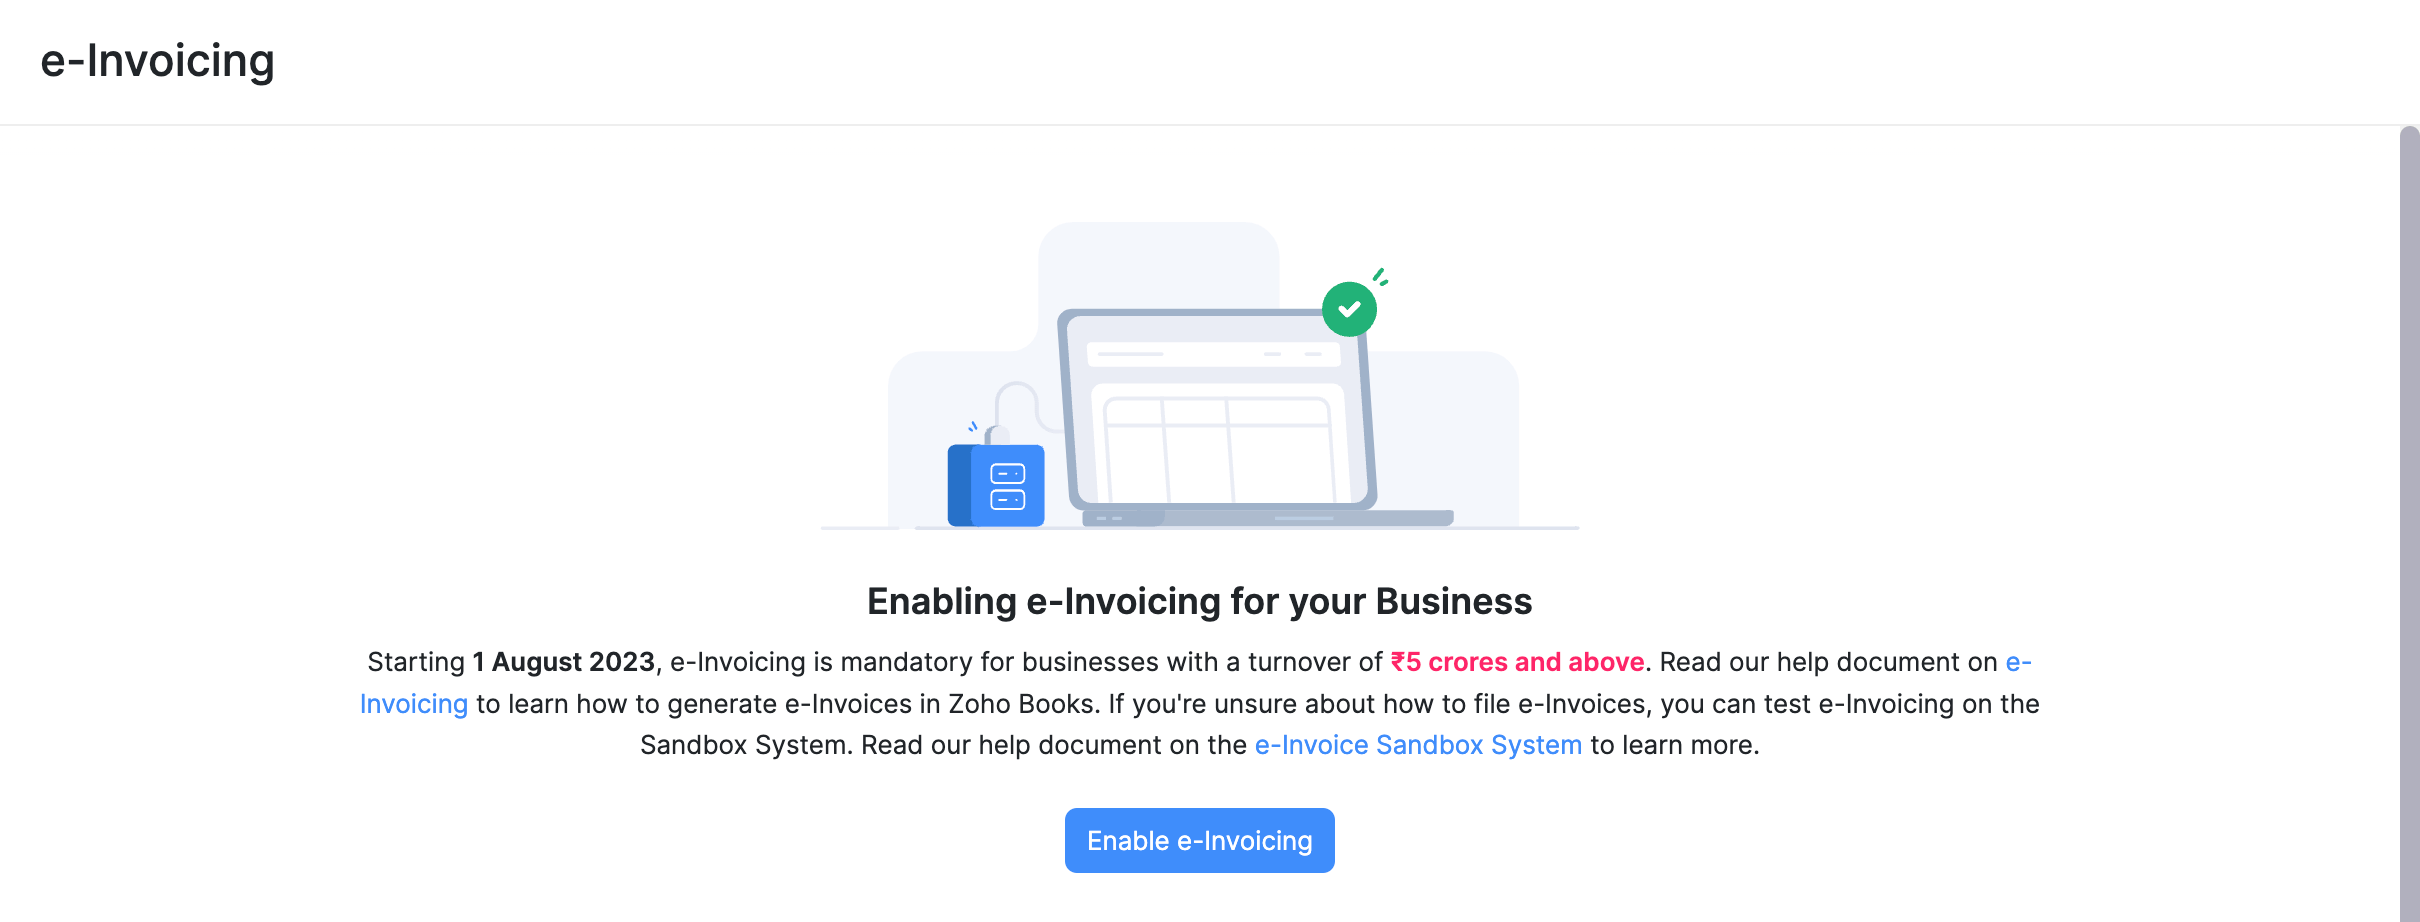 How e-Invoicing works in Zoho Books